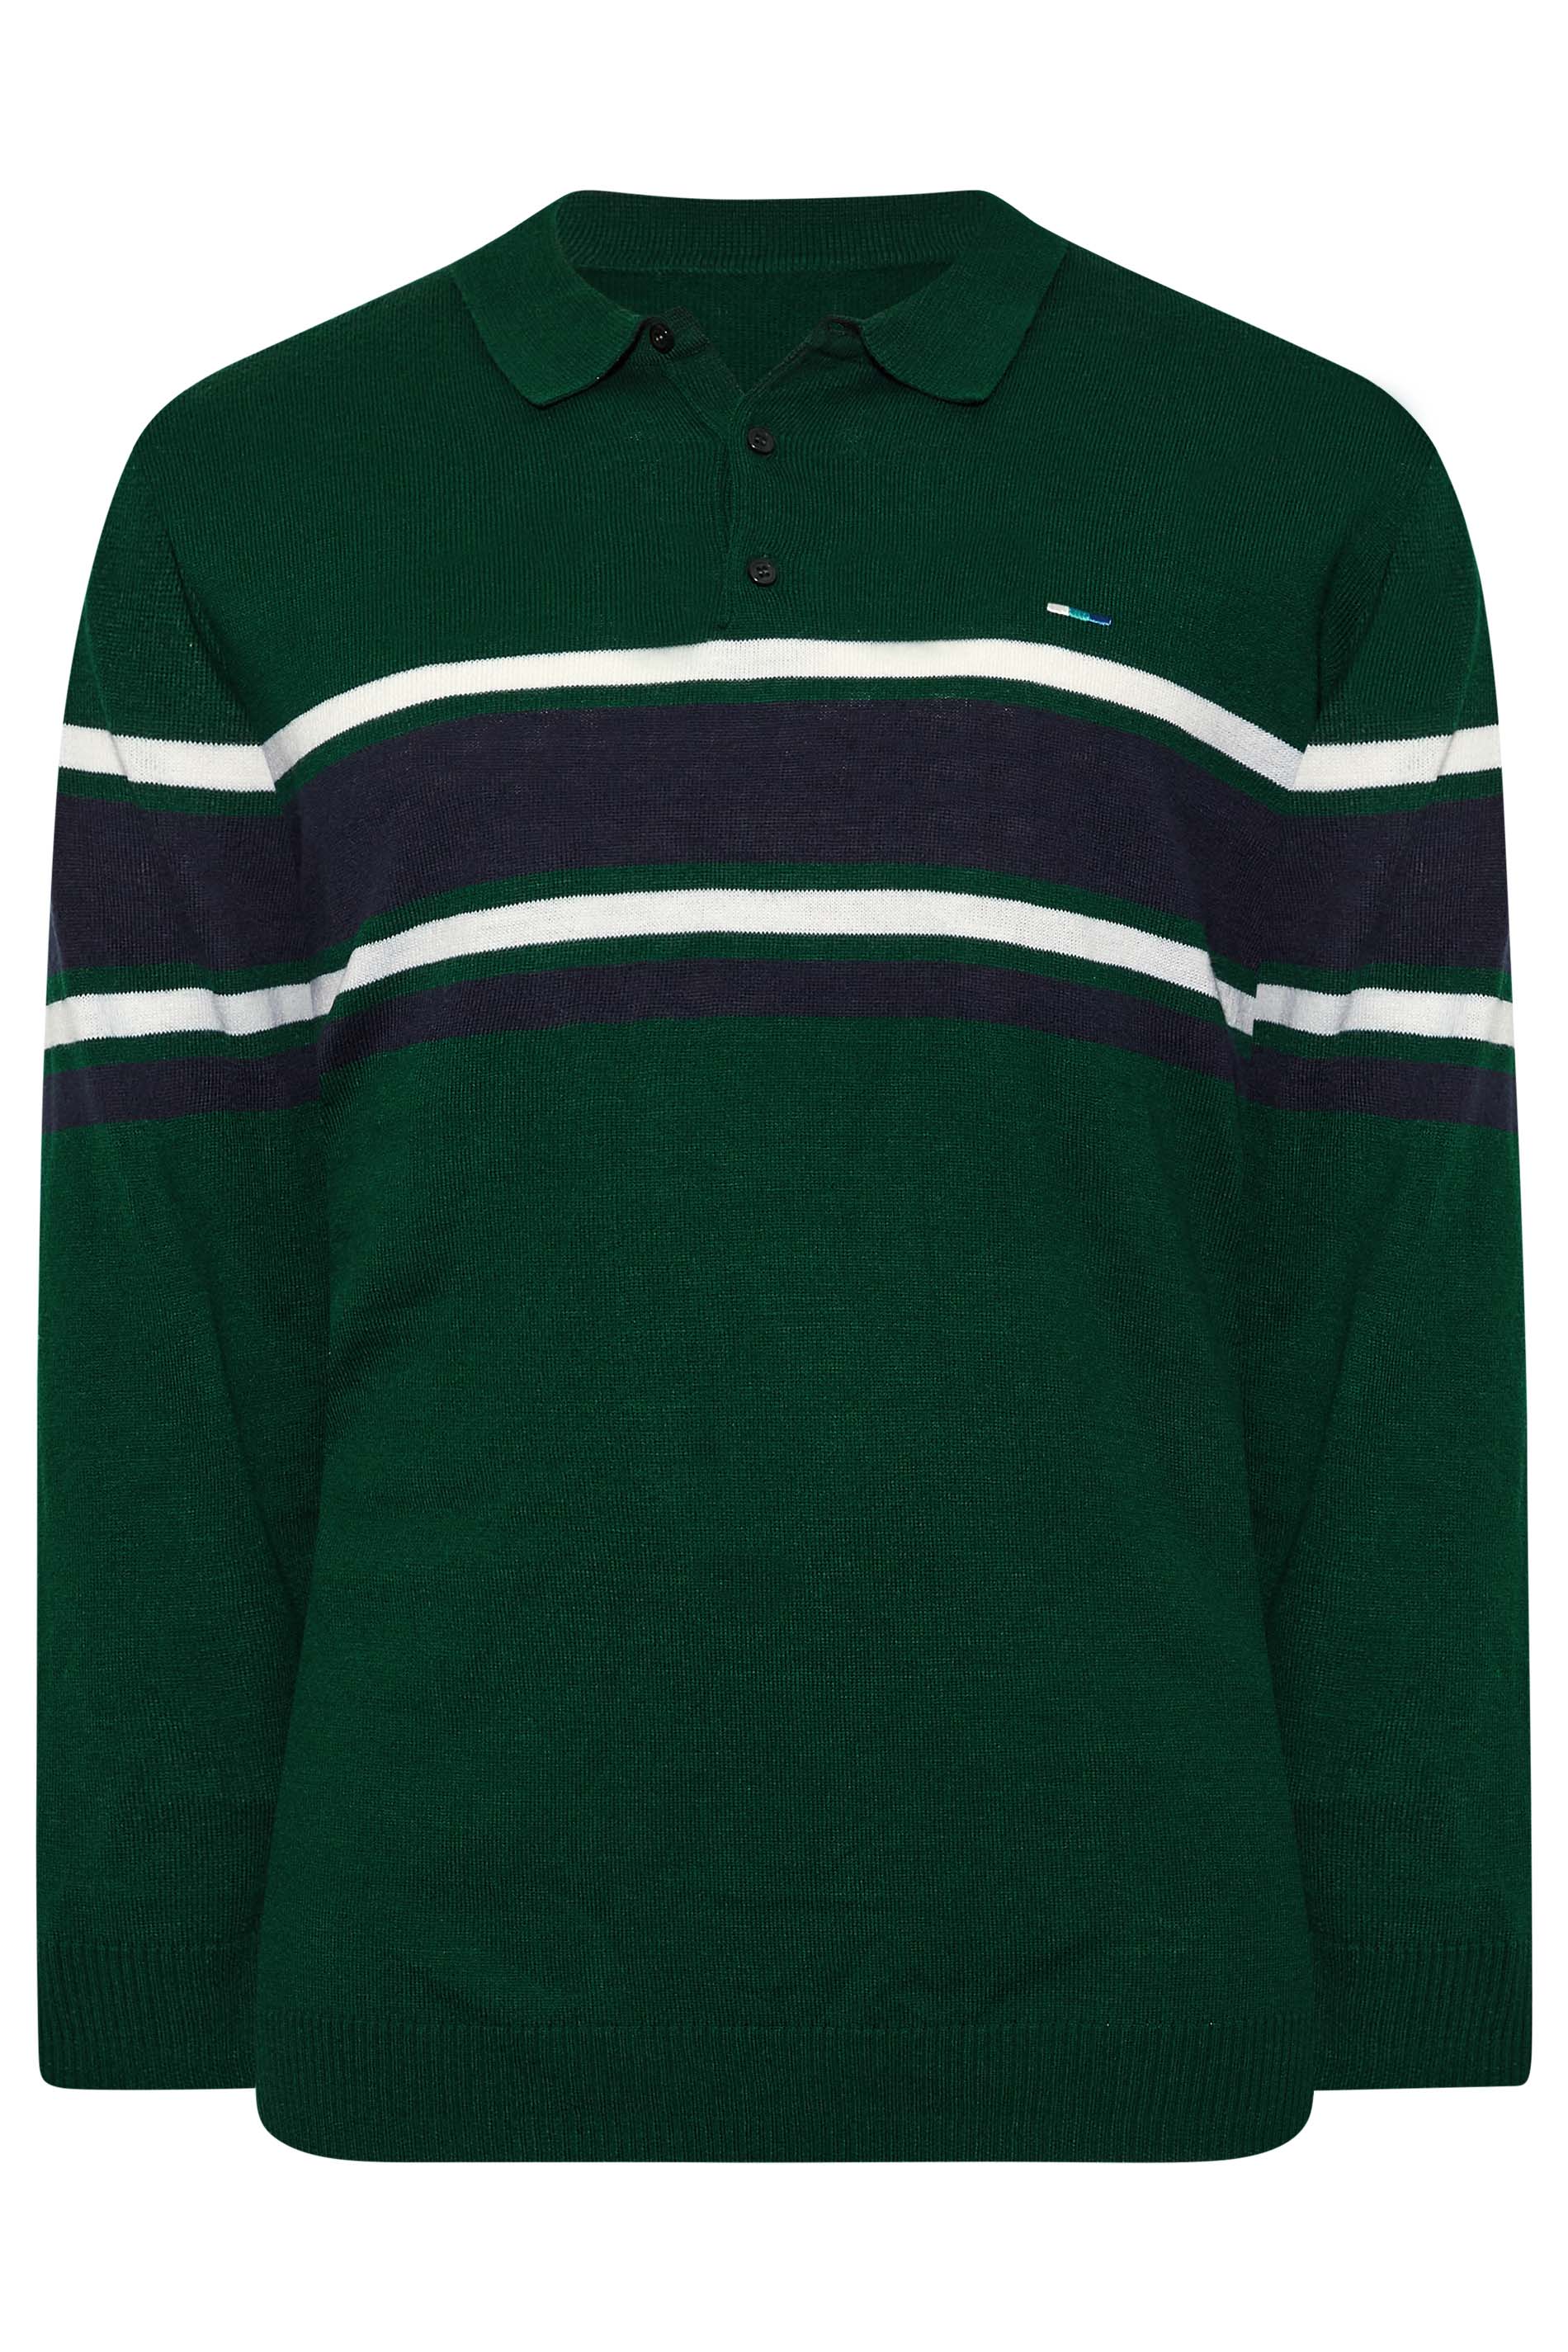 BadRhino Big & Tall Forest Green Stripe Long Sleeve Knitted Polo Shirt 1